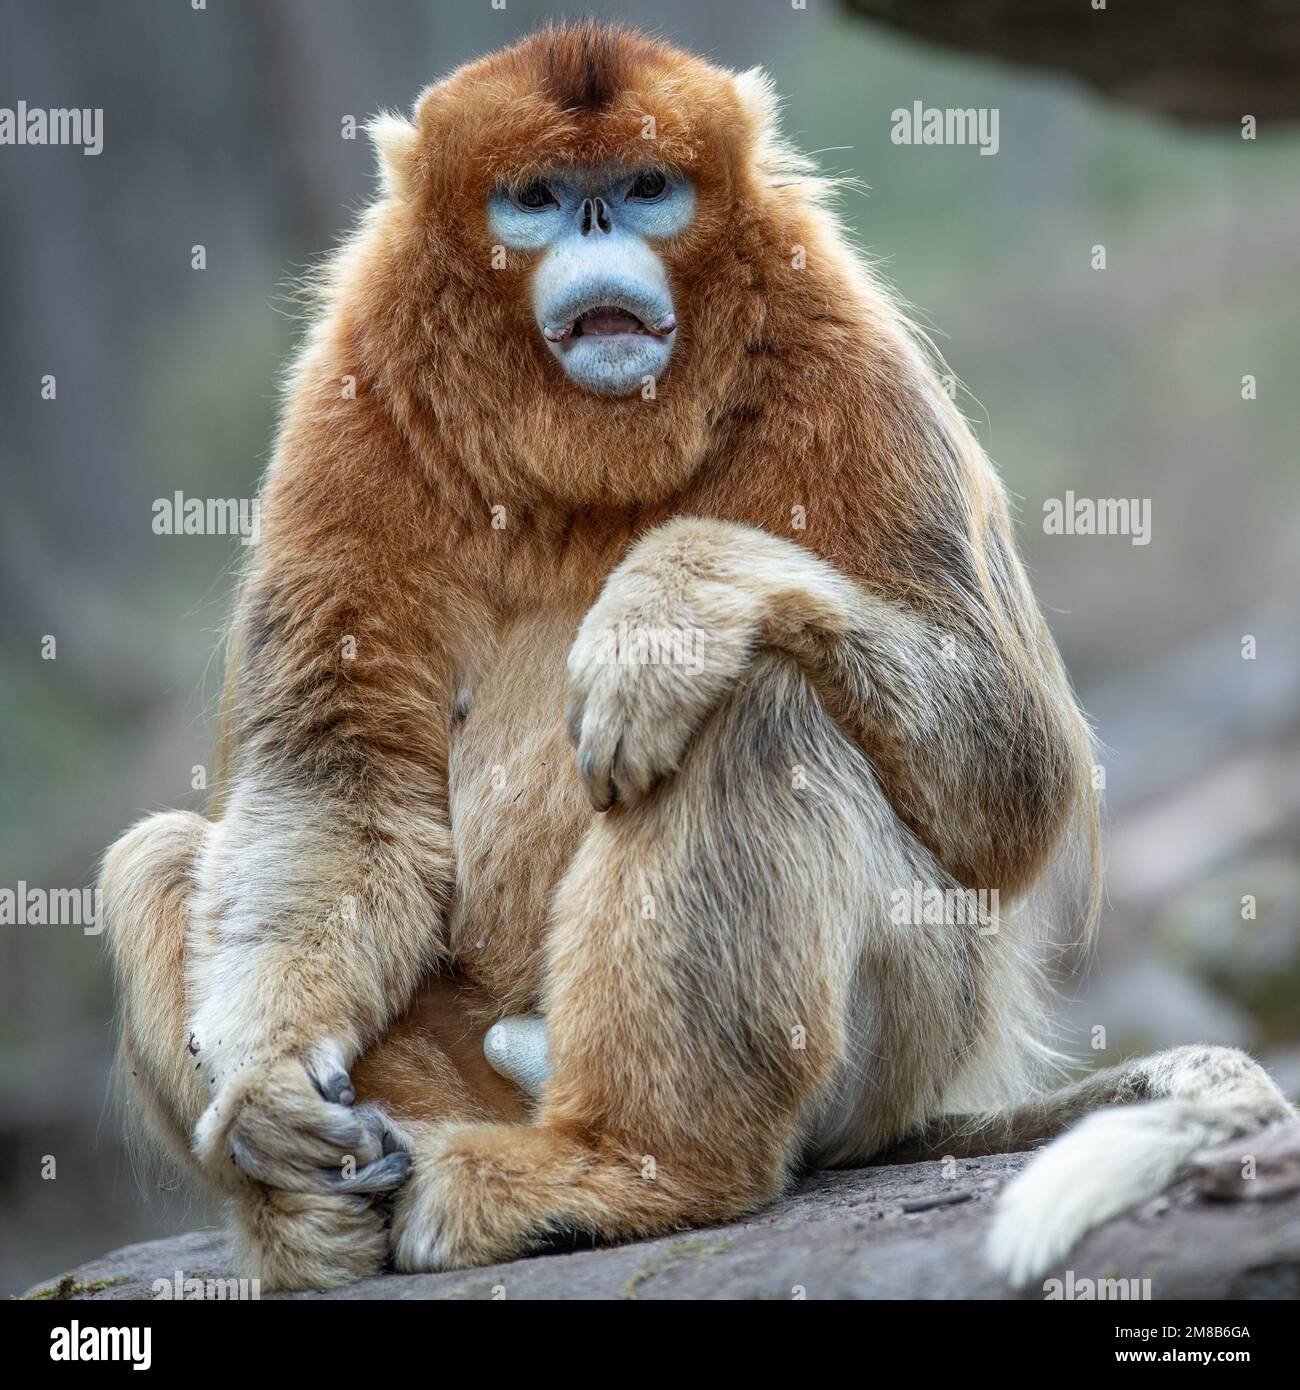 A sad monkey. China: THESE EXPRESSIVE images show wild snub-nosed monkey and their amazing range of emotions that have seen members of this species ga Stock Photo